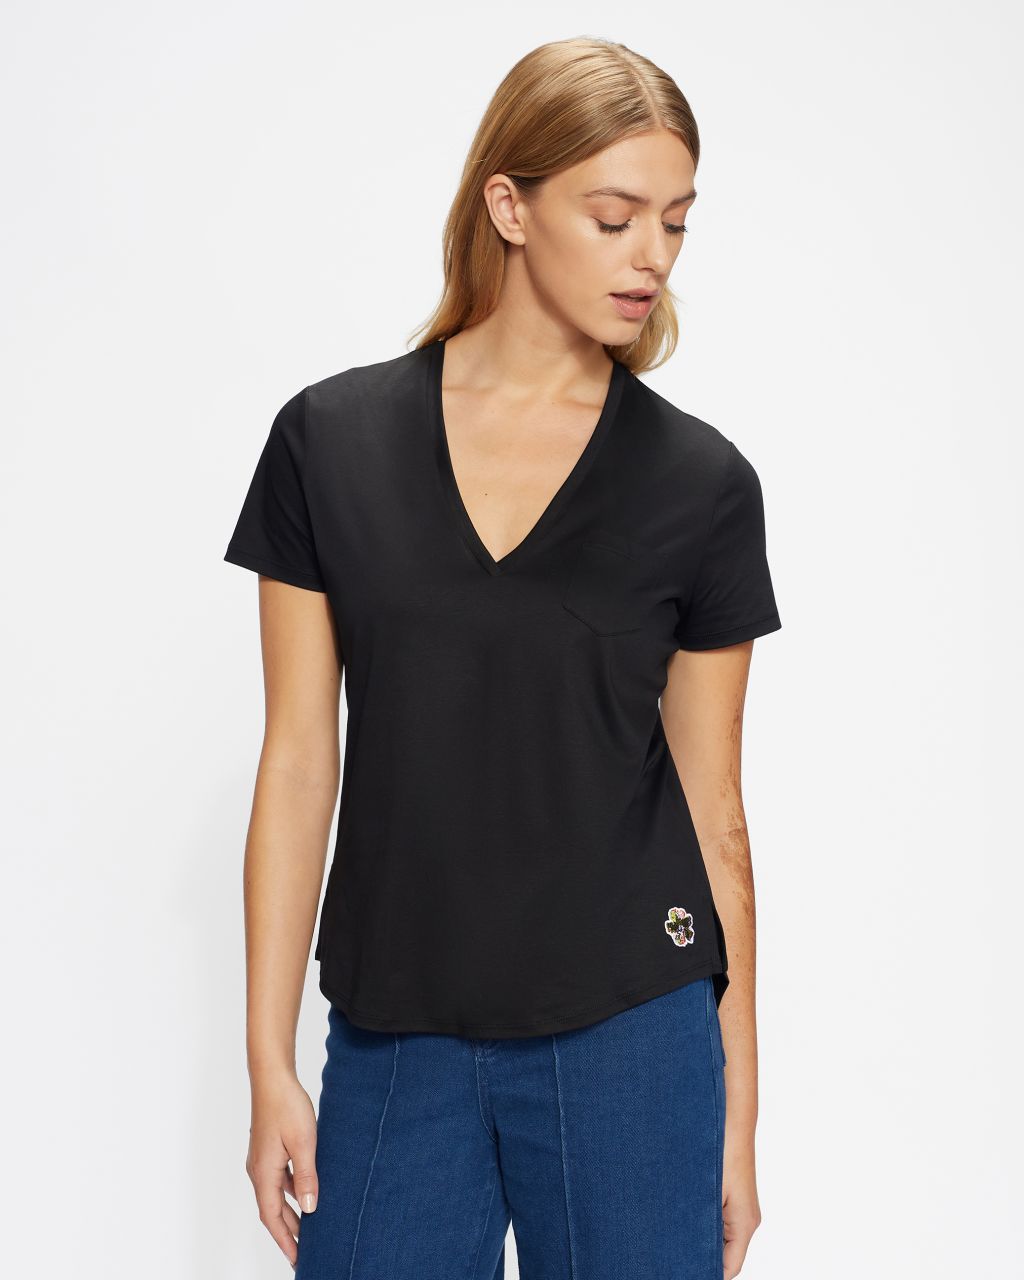 Ted Baker Women's Easy Fit V Neck Tshirt in Black, Lovage, Cotton